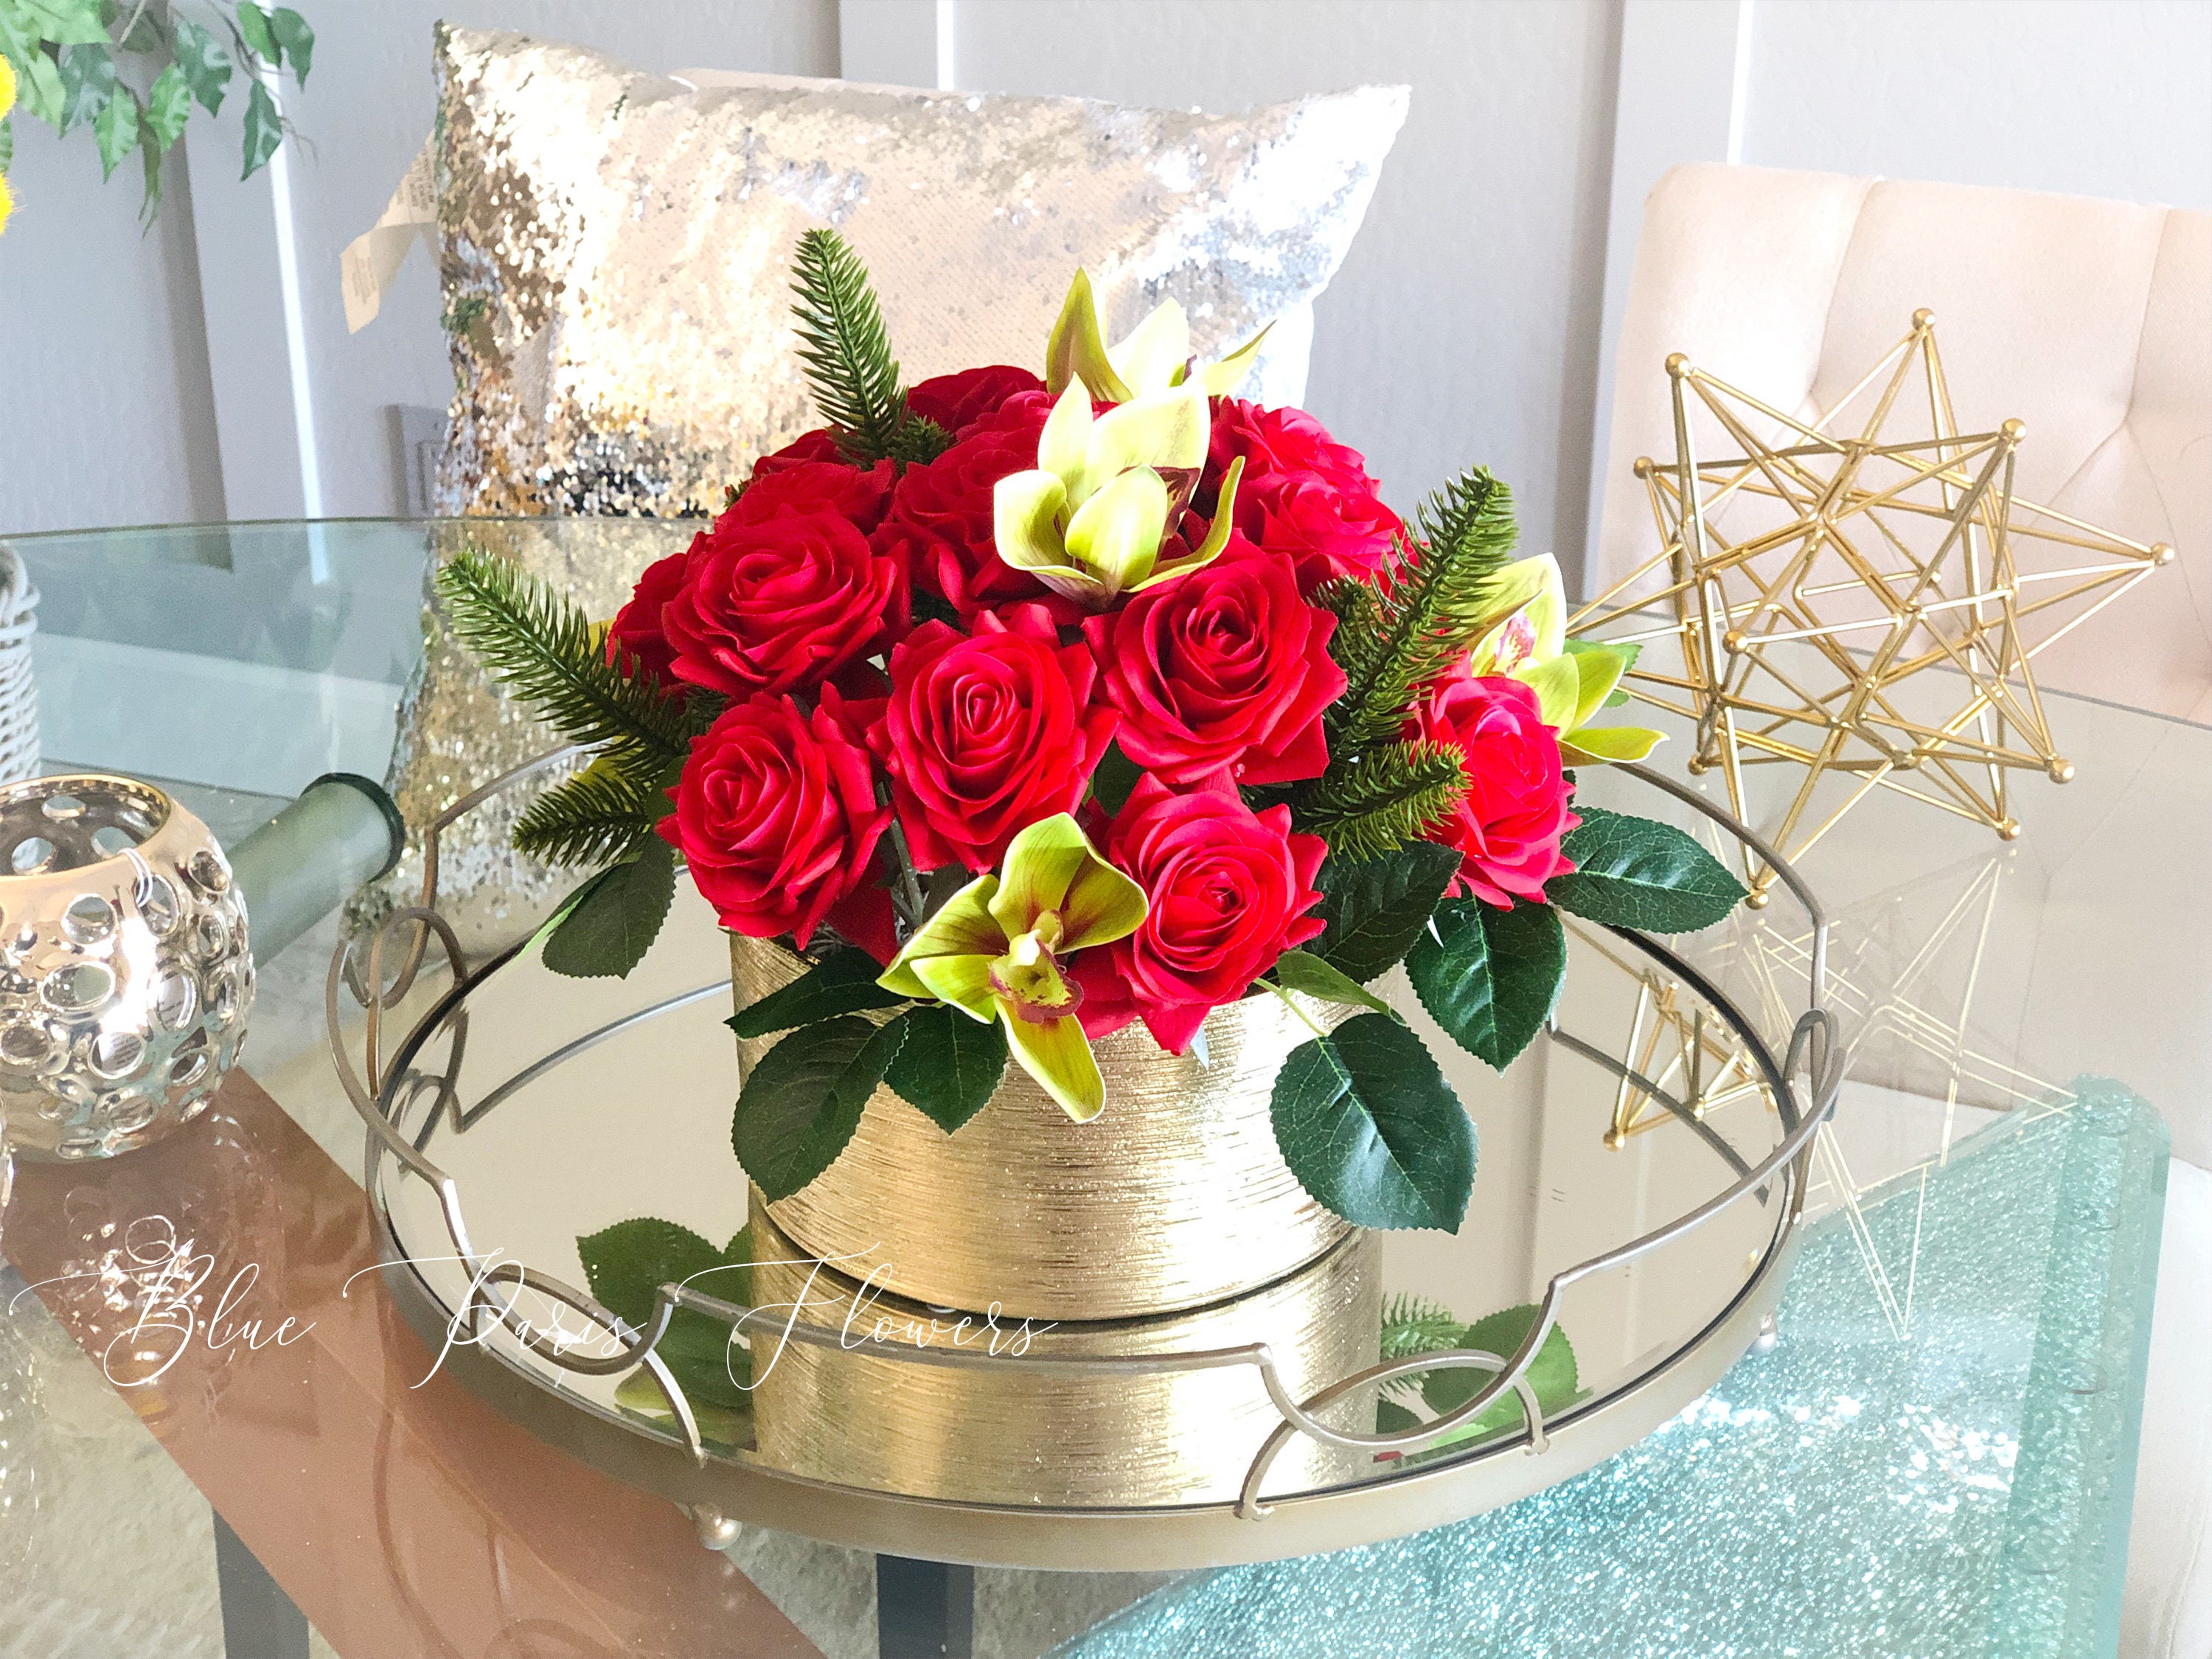 Tabletop Centerpiece Christmas Decoration, Artificial Red Rose Flowers –  MyGift